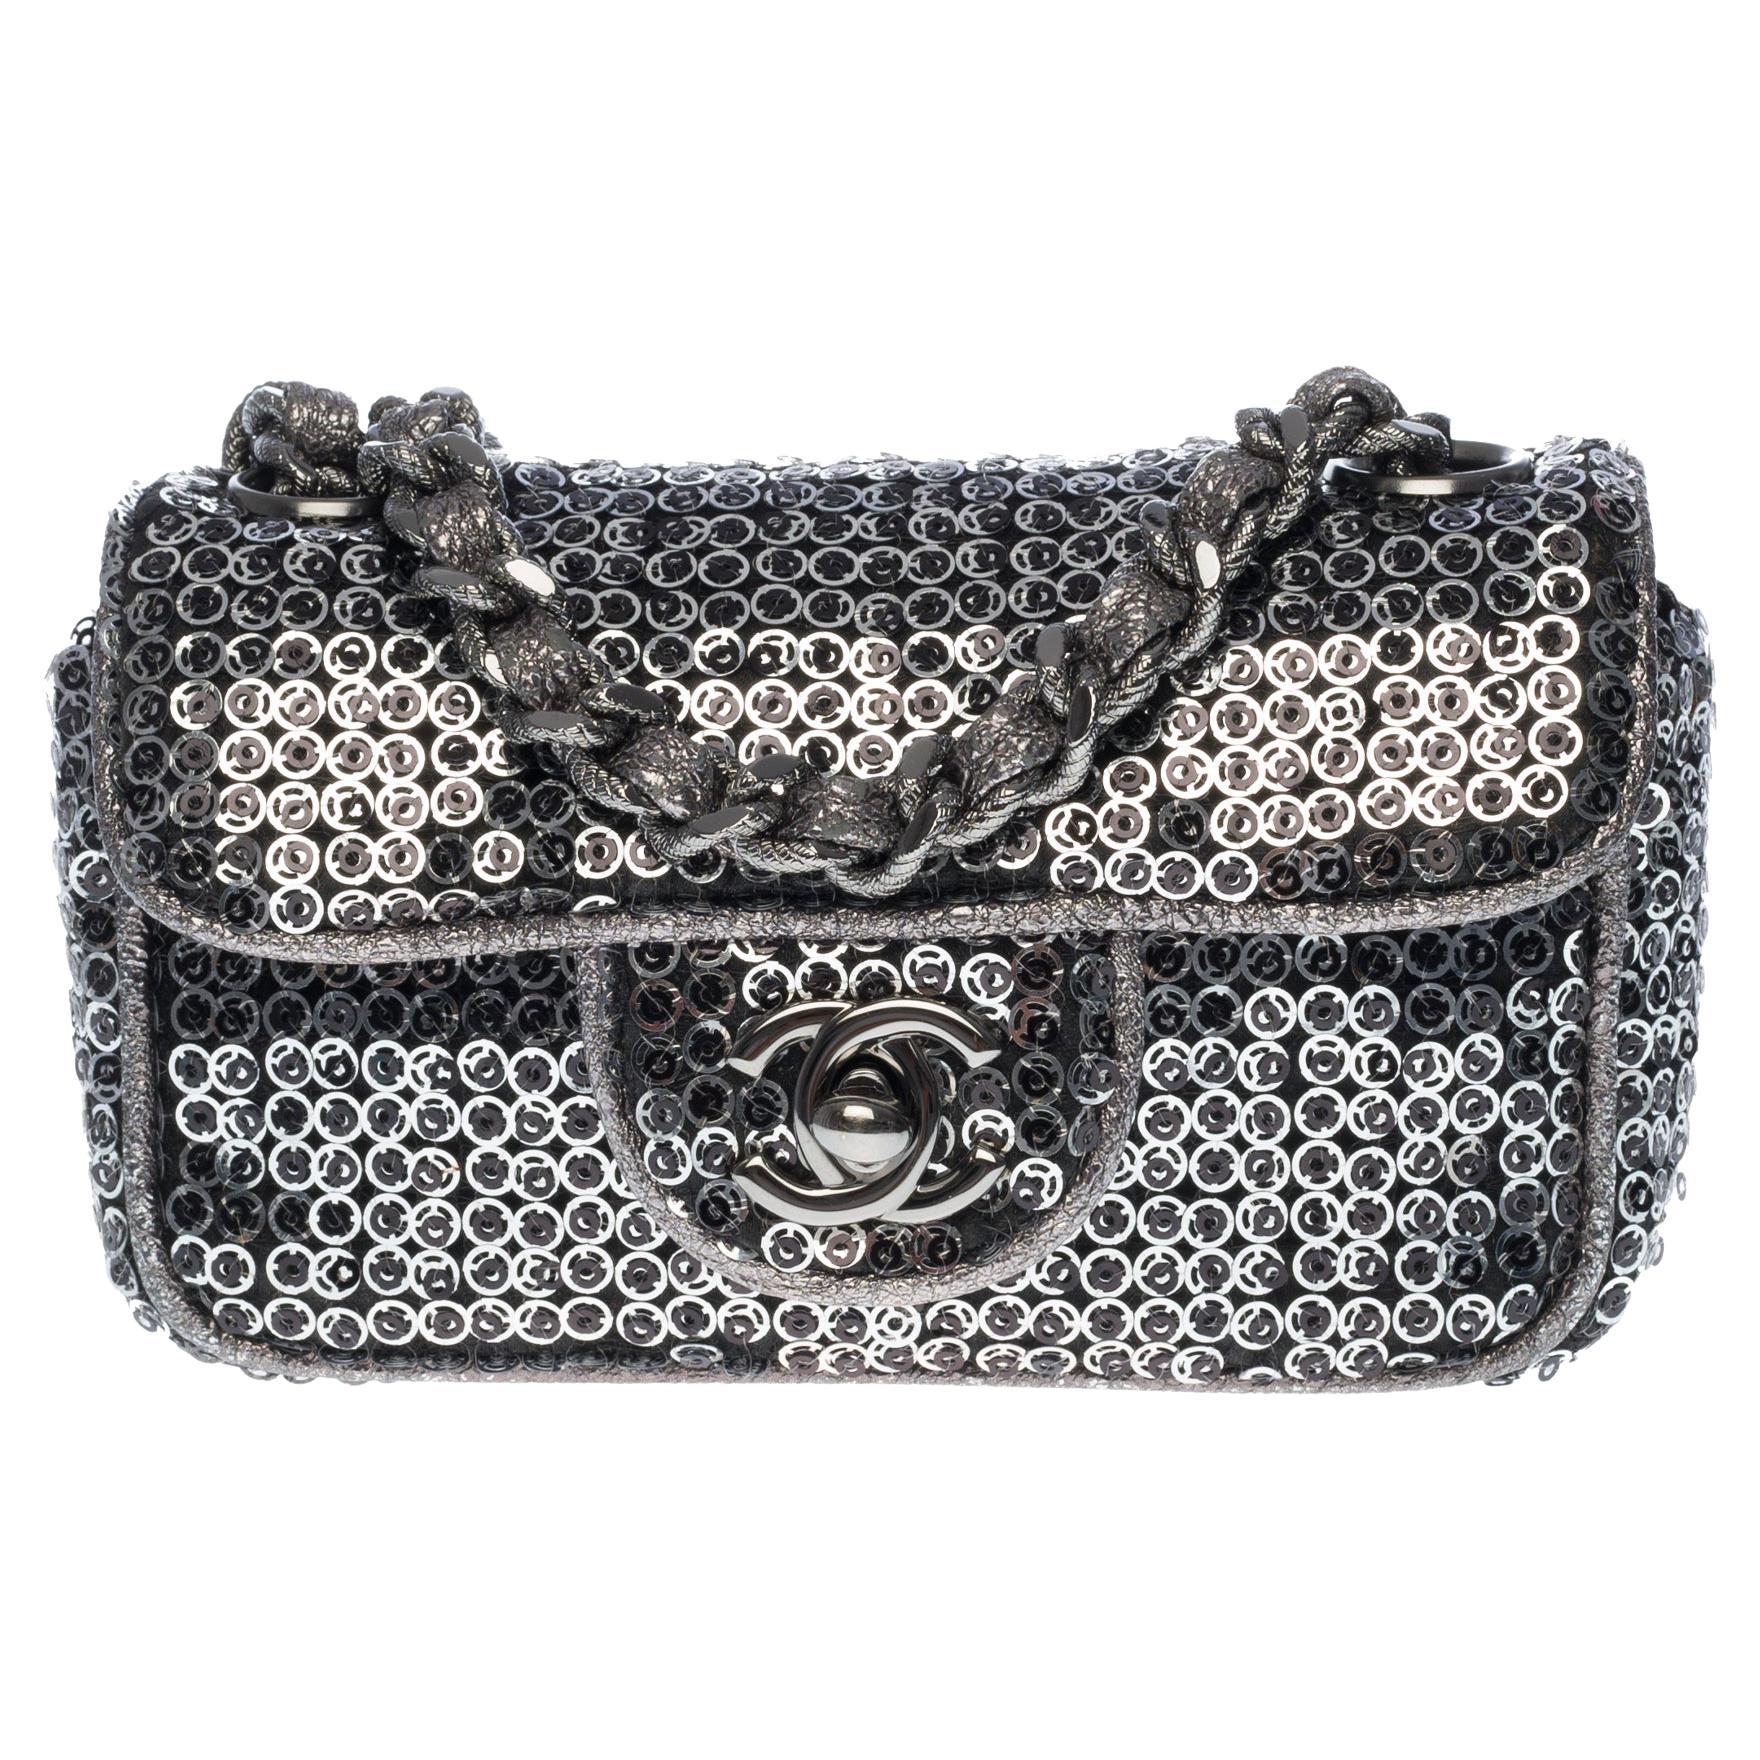 Limited Edition Chanel Mini Flap bag shoulder bag in micro silver